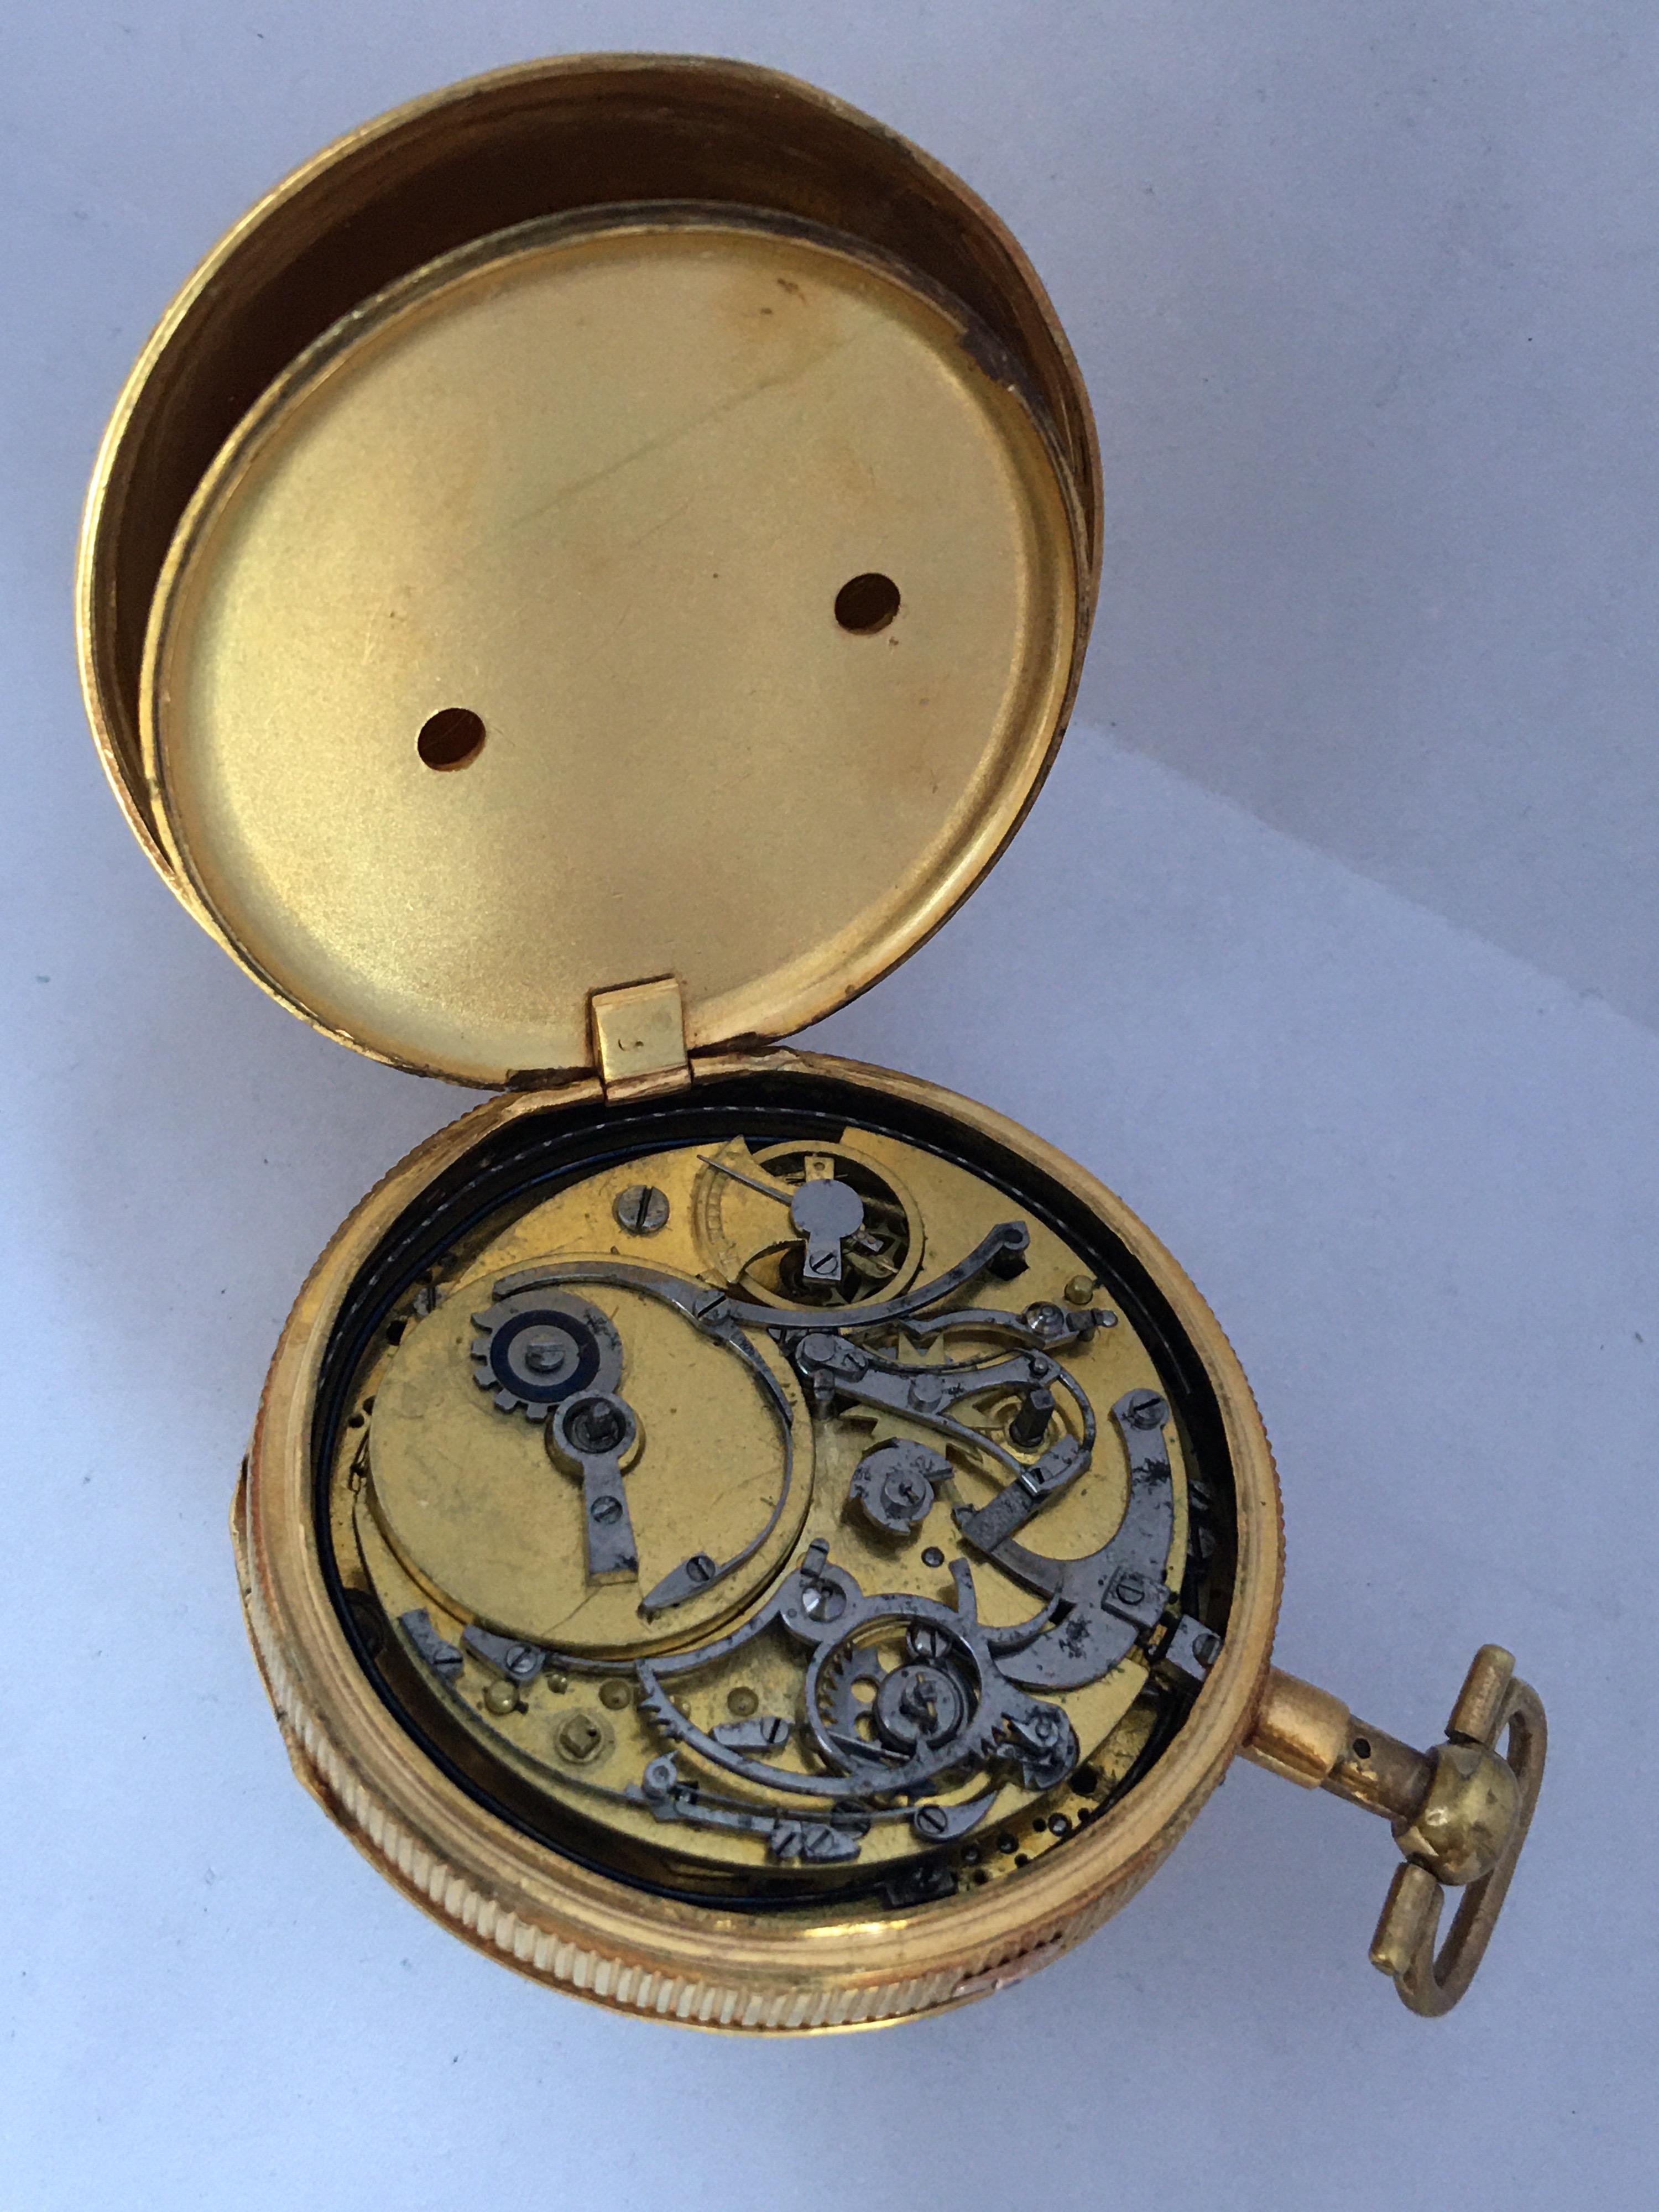 Fine and Rare Antique Gold Quarter Repeater and Musical Pocket Watch In Good Condition For Sale In Carlisle, GB